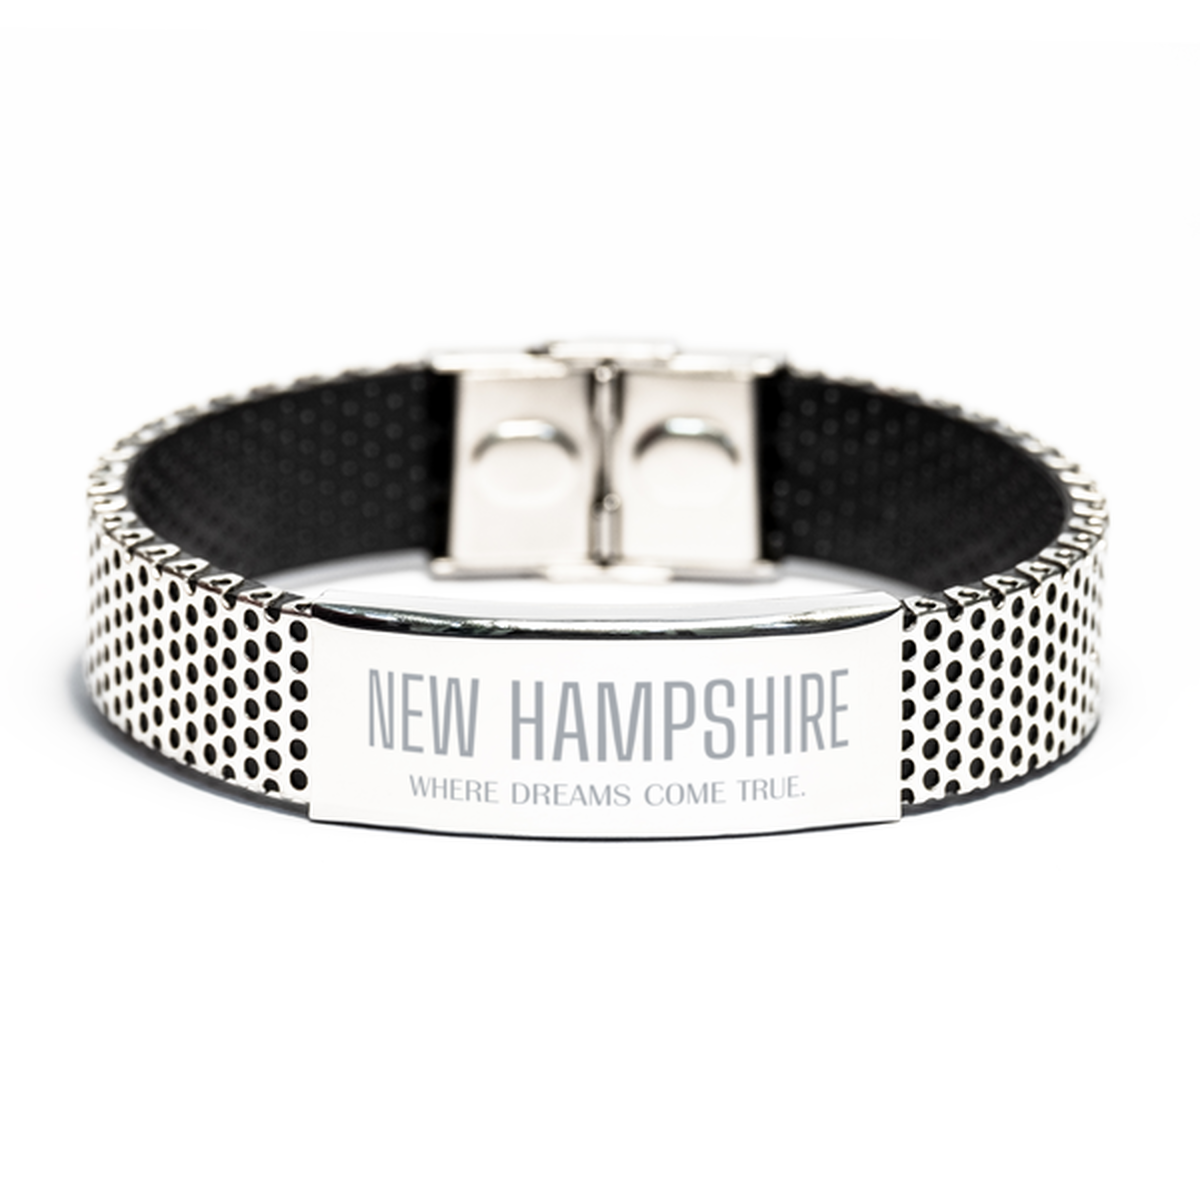 Love New Hampshire State Stainless Steel Bracelet, New Hampshire Where dreams come true, Birthday Inspirational Gifts For New Hampshire Men, Women, Friends